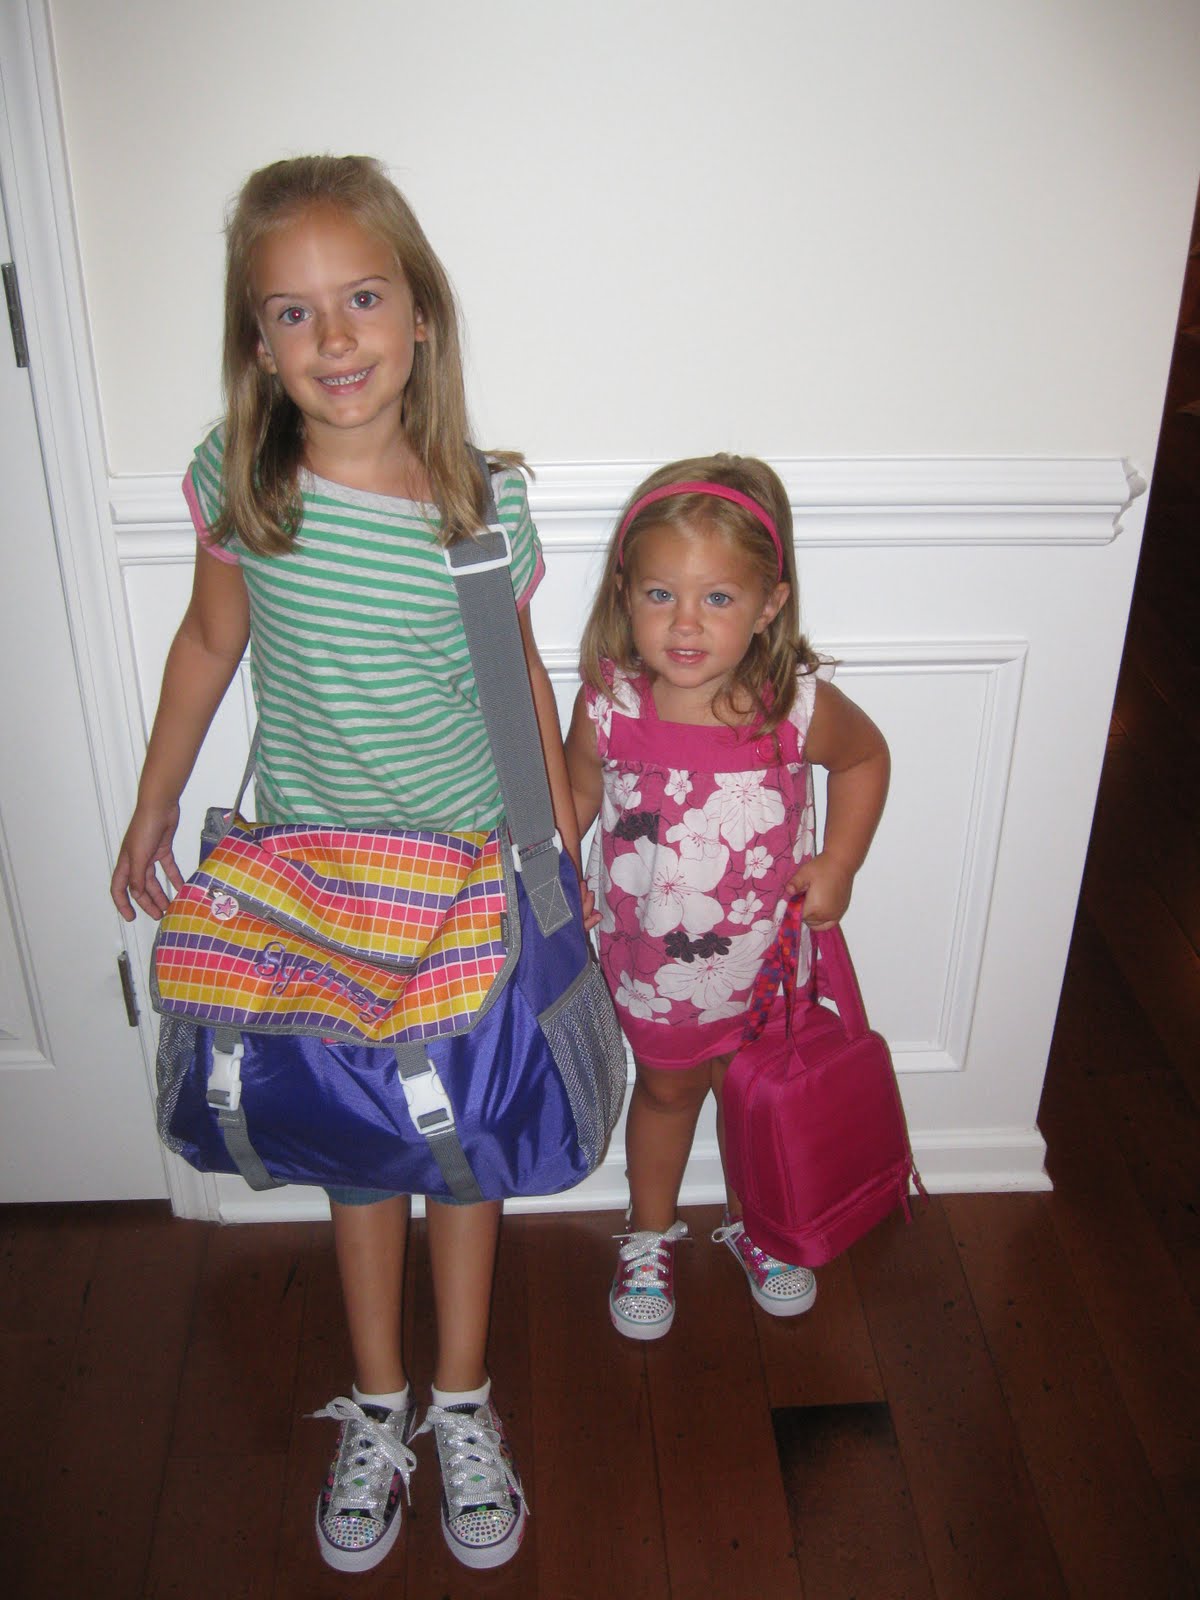 Our Girls: 4th of July, Swimming at the Pool and First Day of School